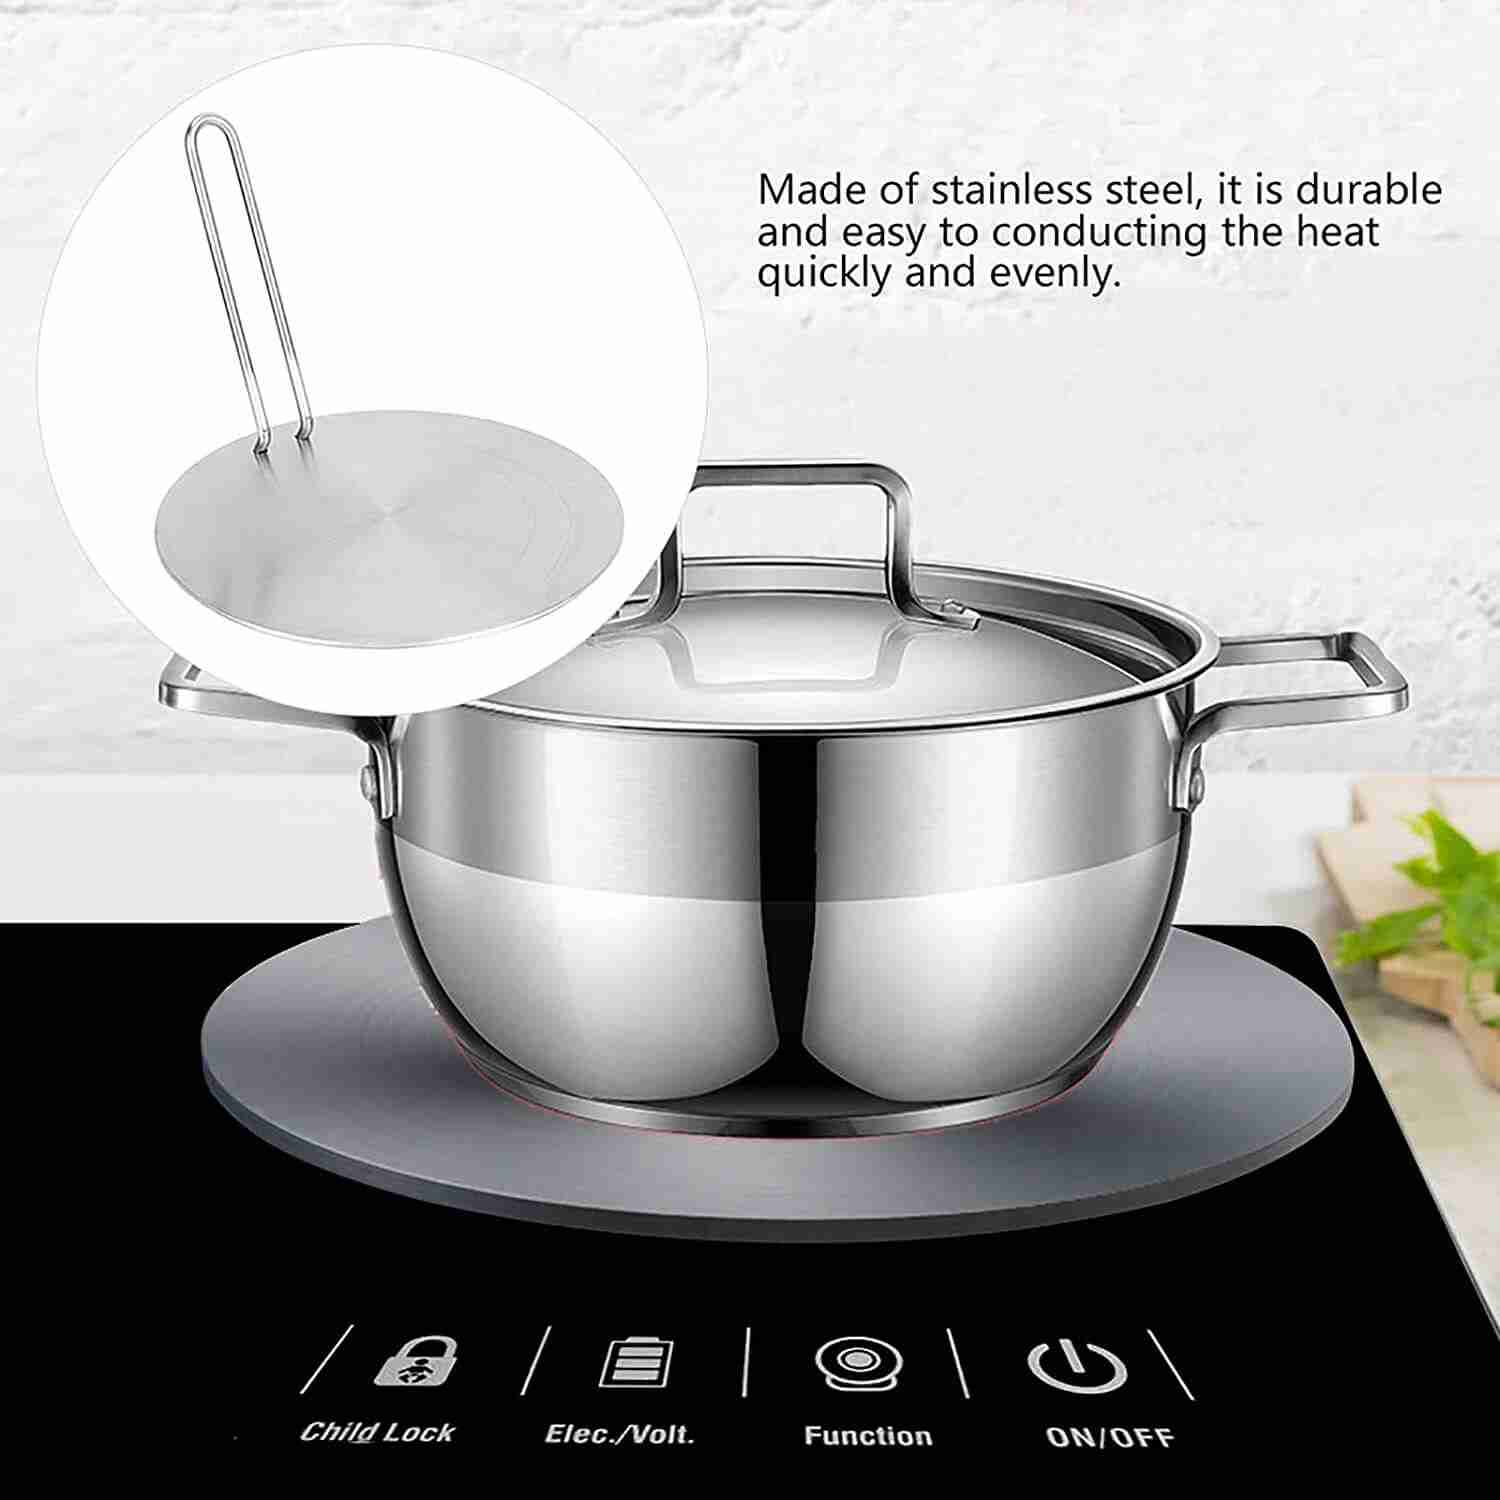 What Is Non Induction Cookware? - How To Know Non Induction